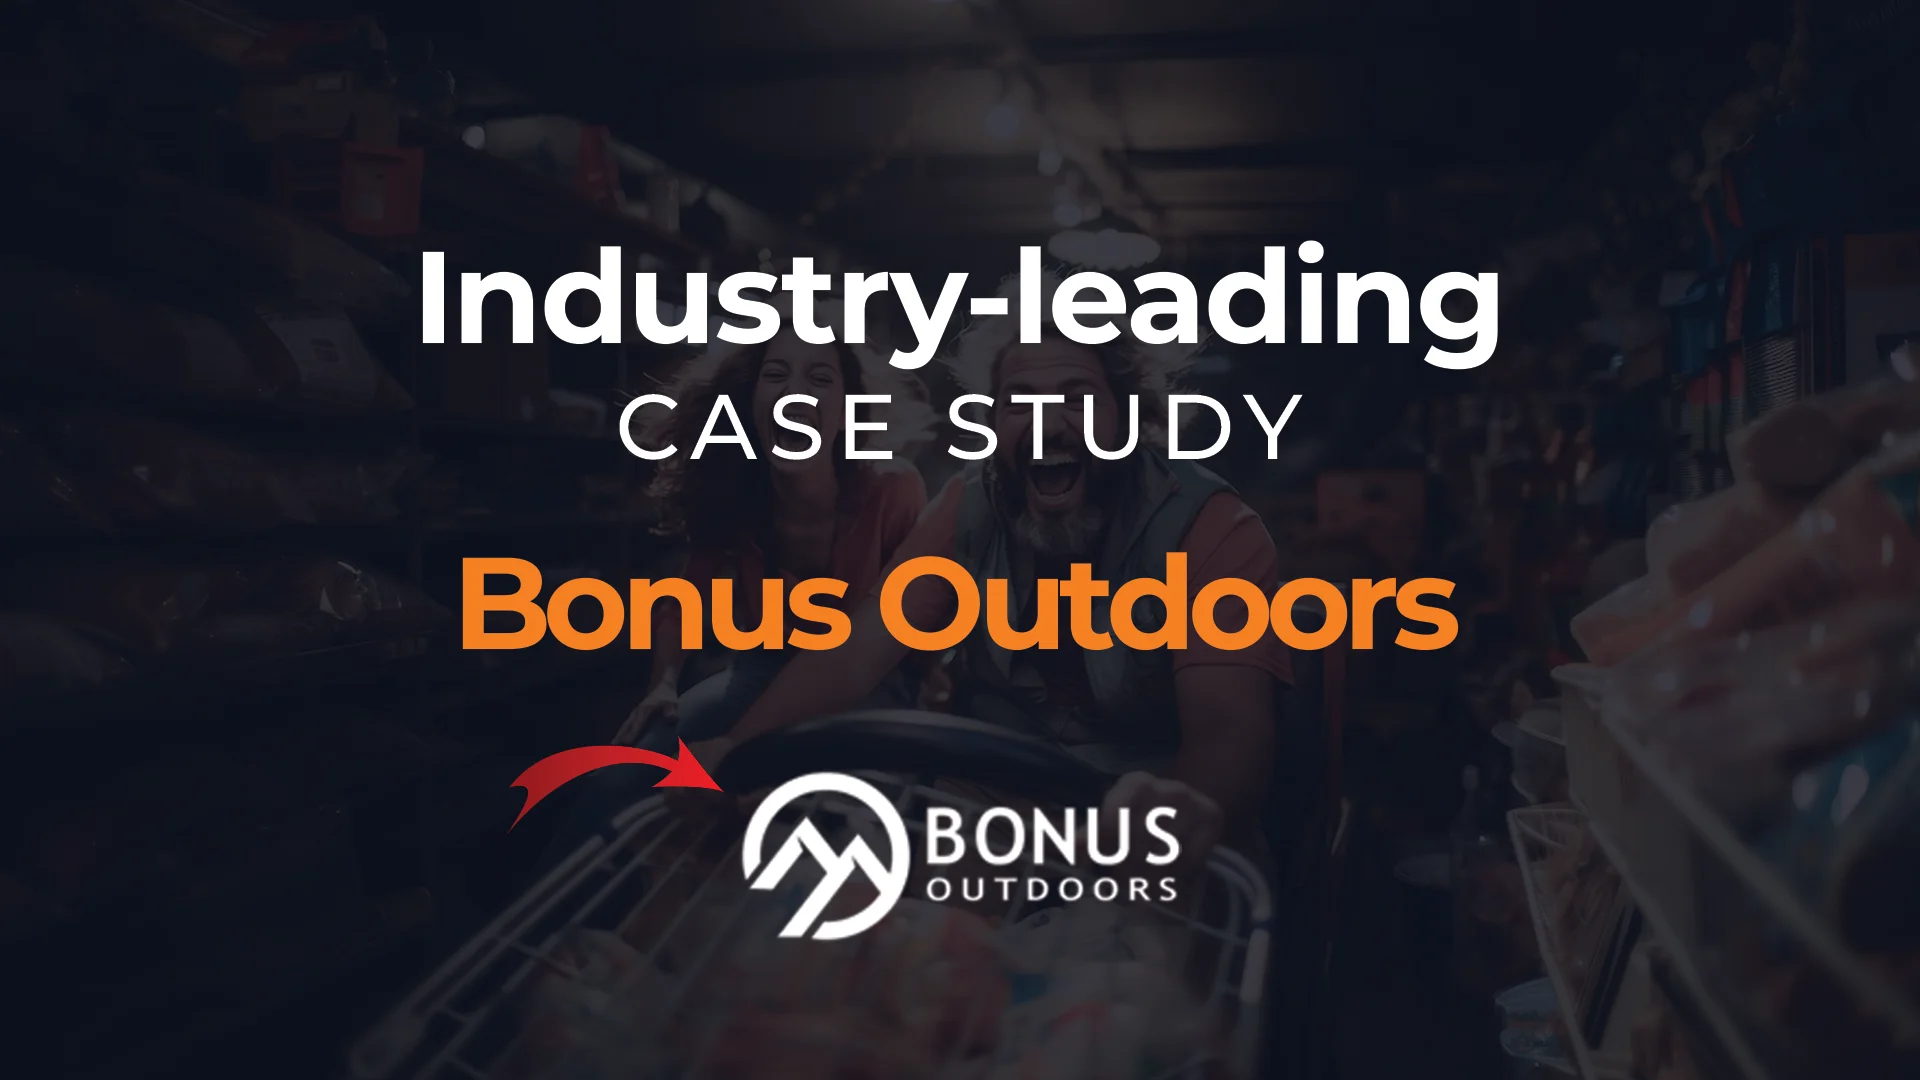 AMZDUDES Employs Strategies To Cut Inventory Costs By 42% And 59% Profit Boost For Bonus Outdoors!